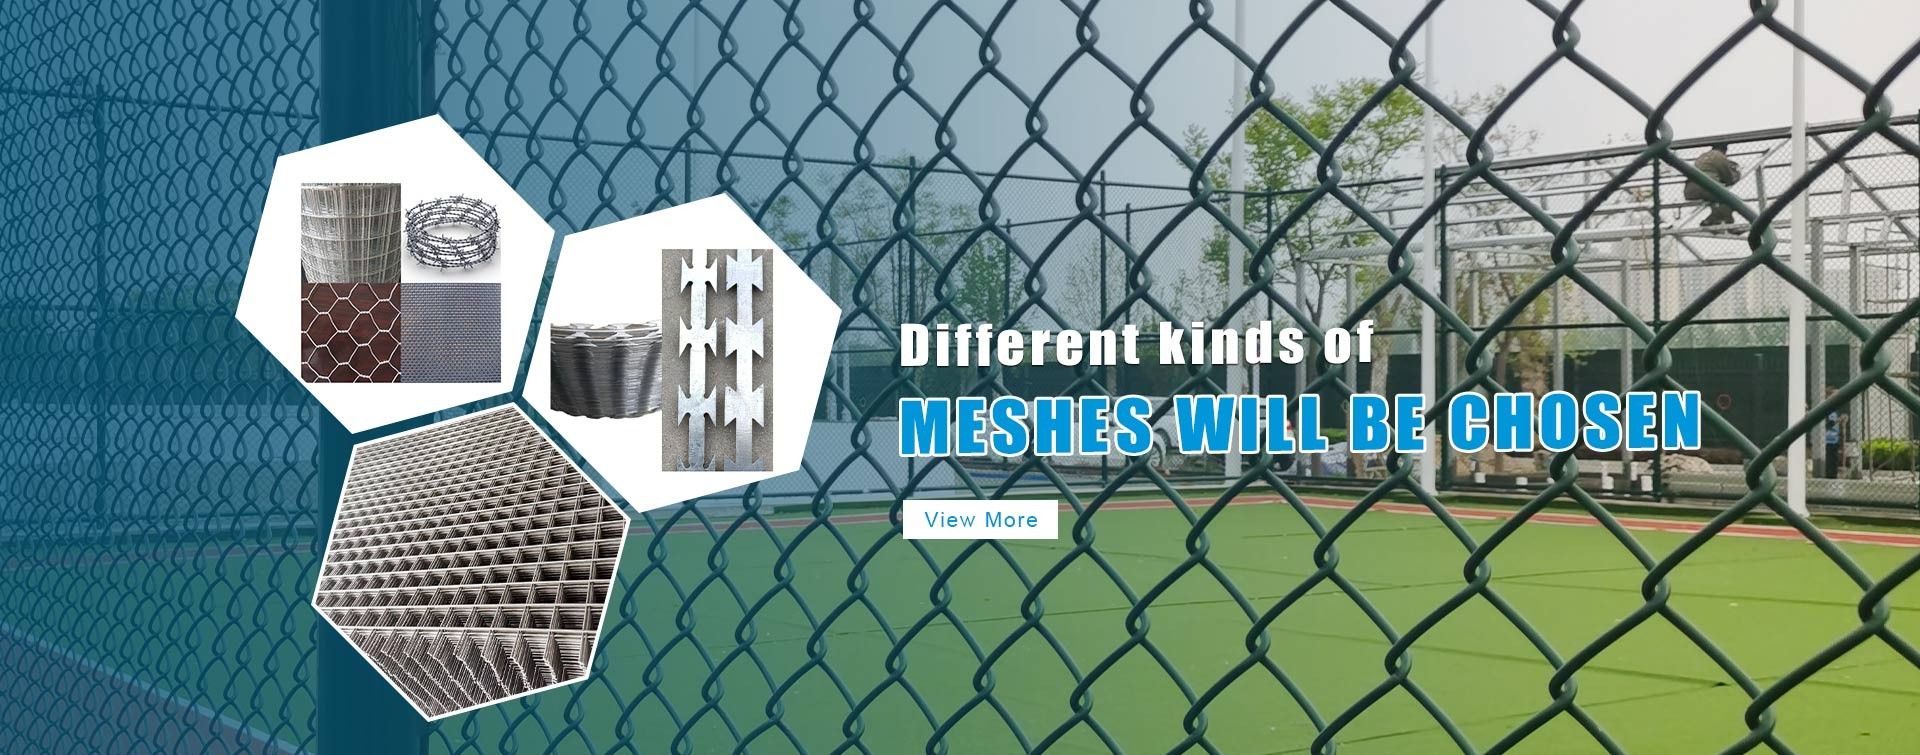 Wire Fencing Mesh